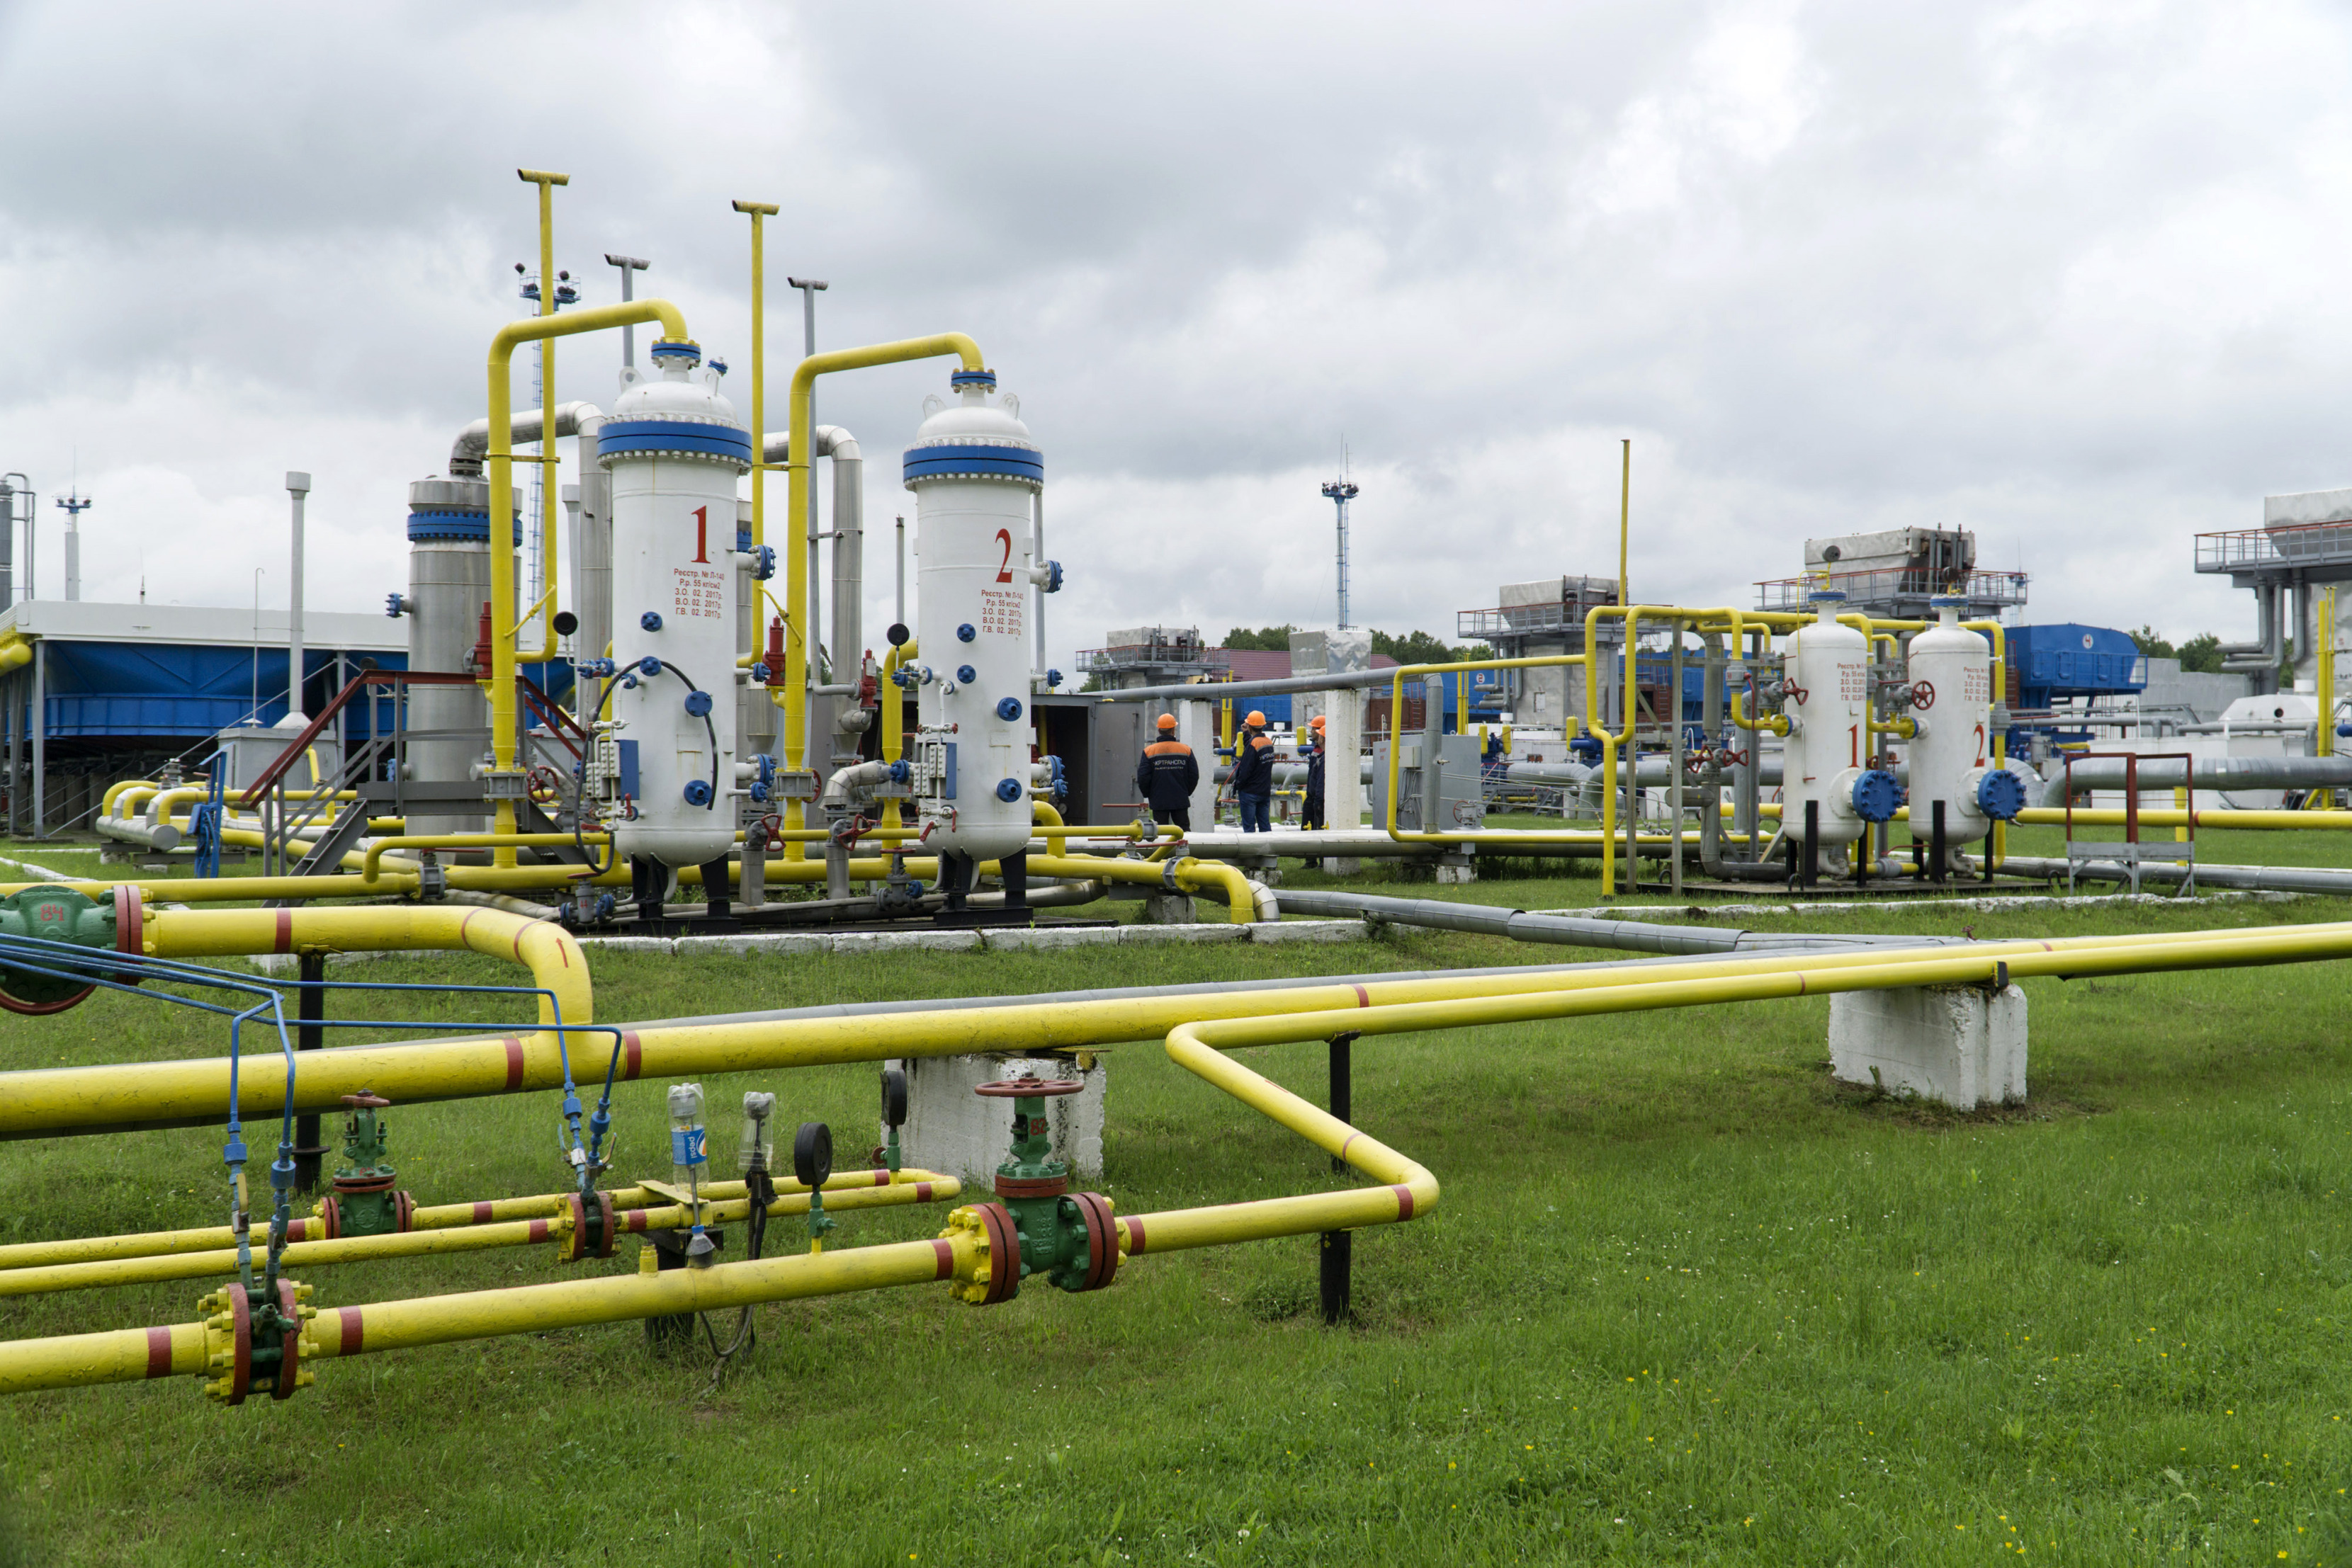 NAK Naftogaz Ukrainy Underground Gas Storage Facility As Company Seeks New Deal With Russia For The Winter Season